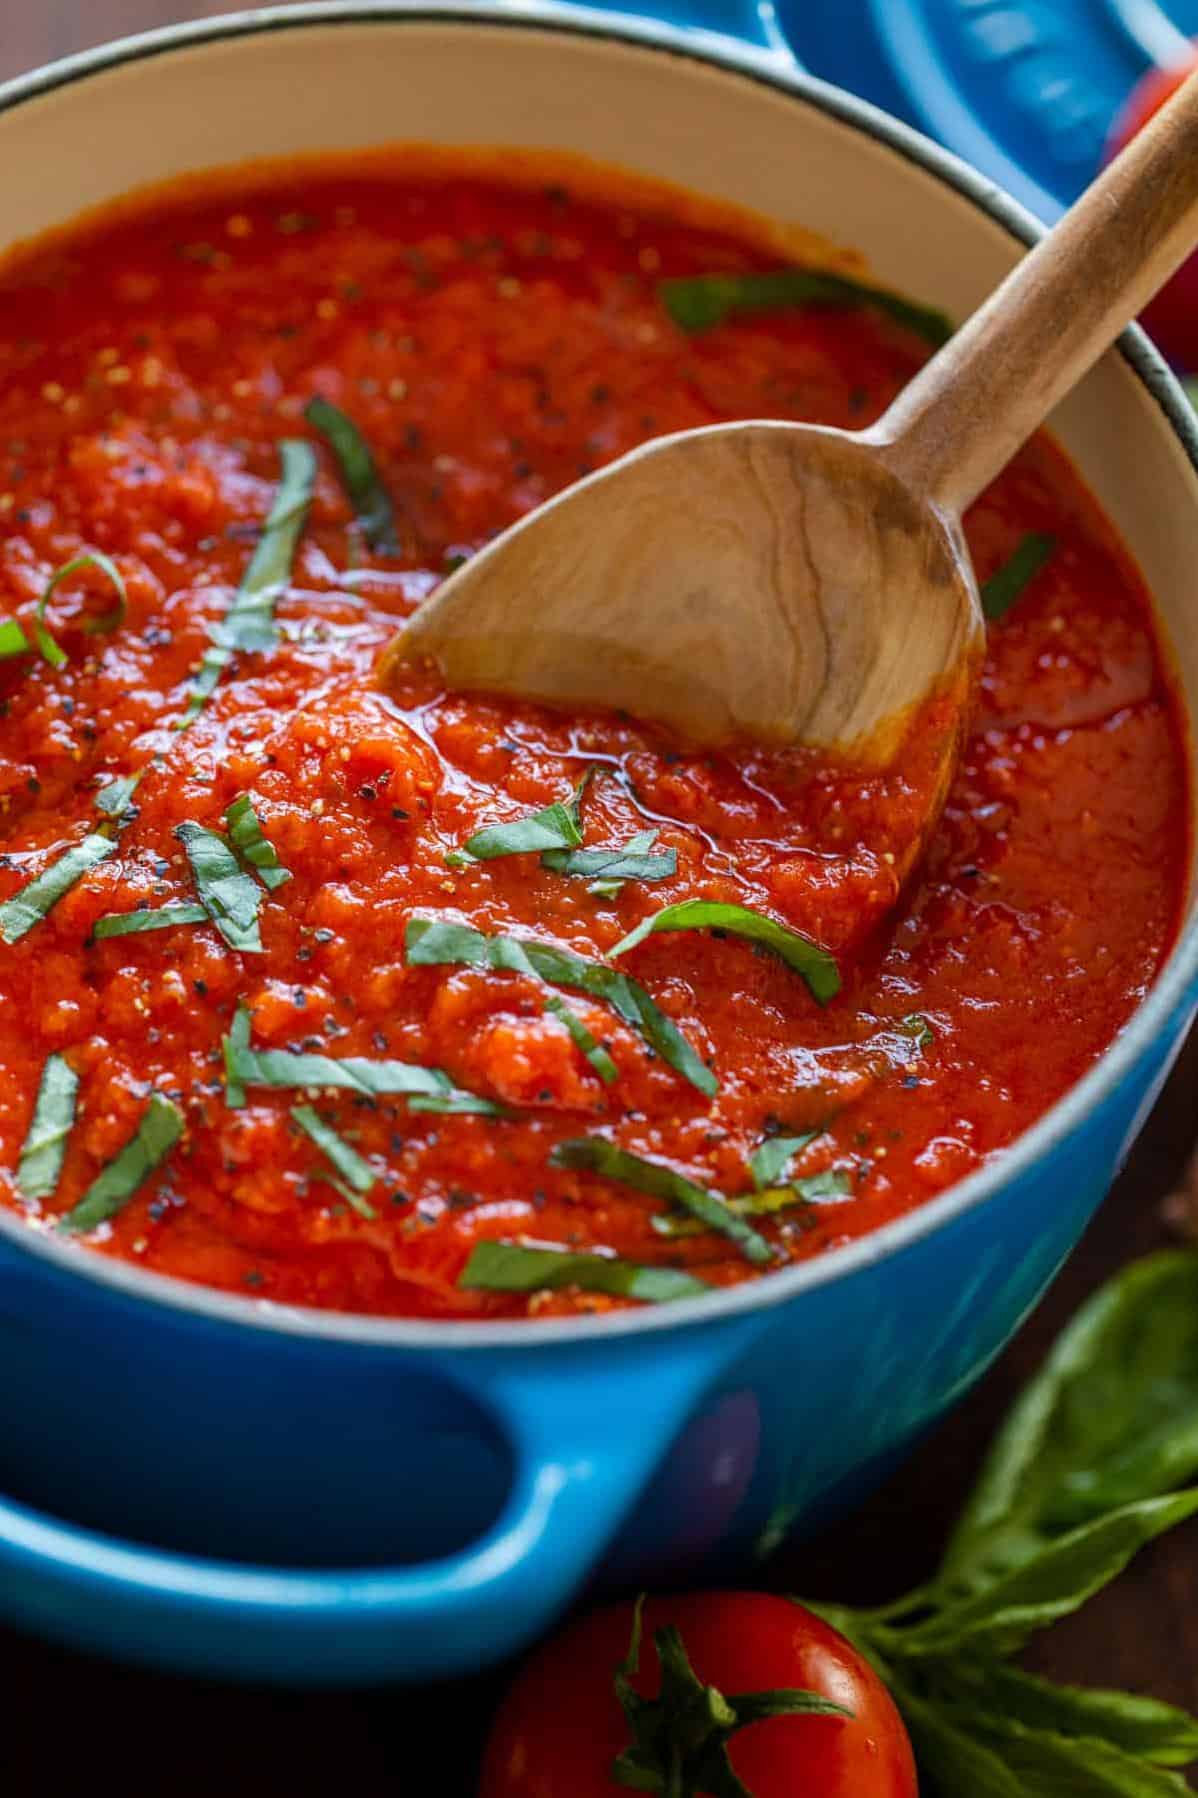  The aroma of garlic and basil will fill your kitchen while cooking this sauce.